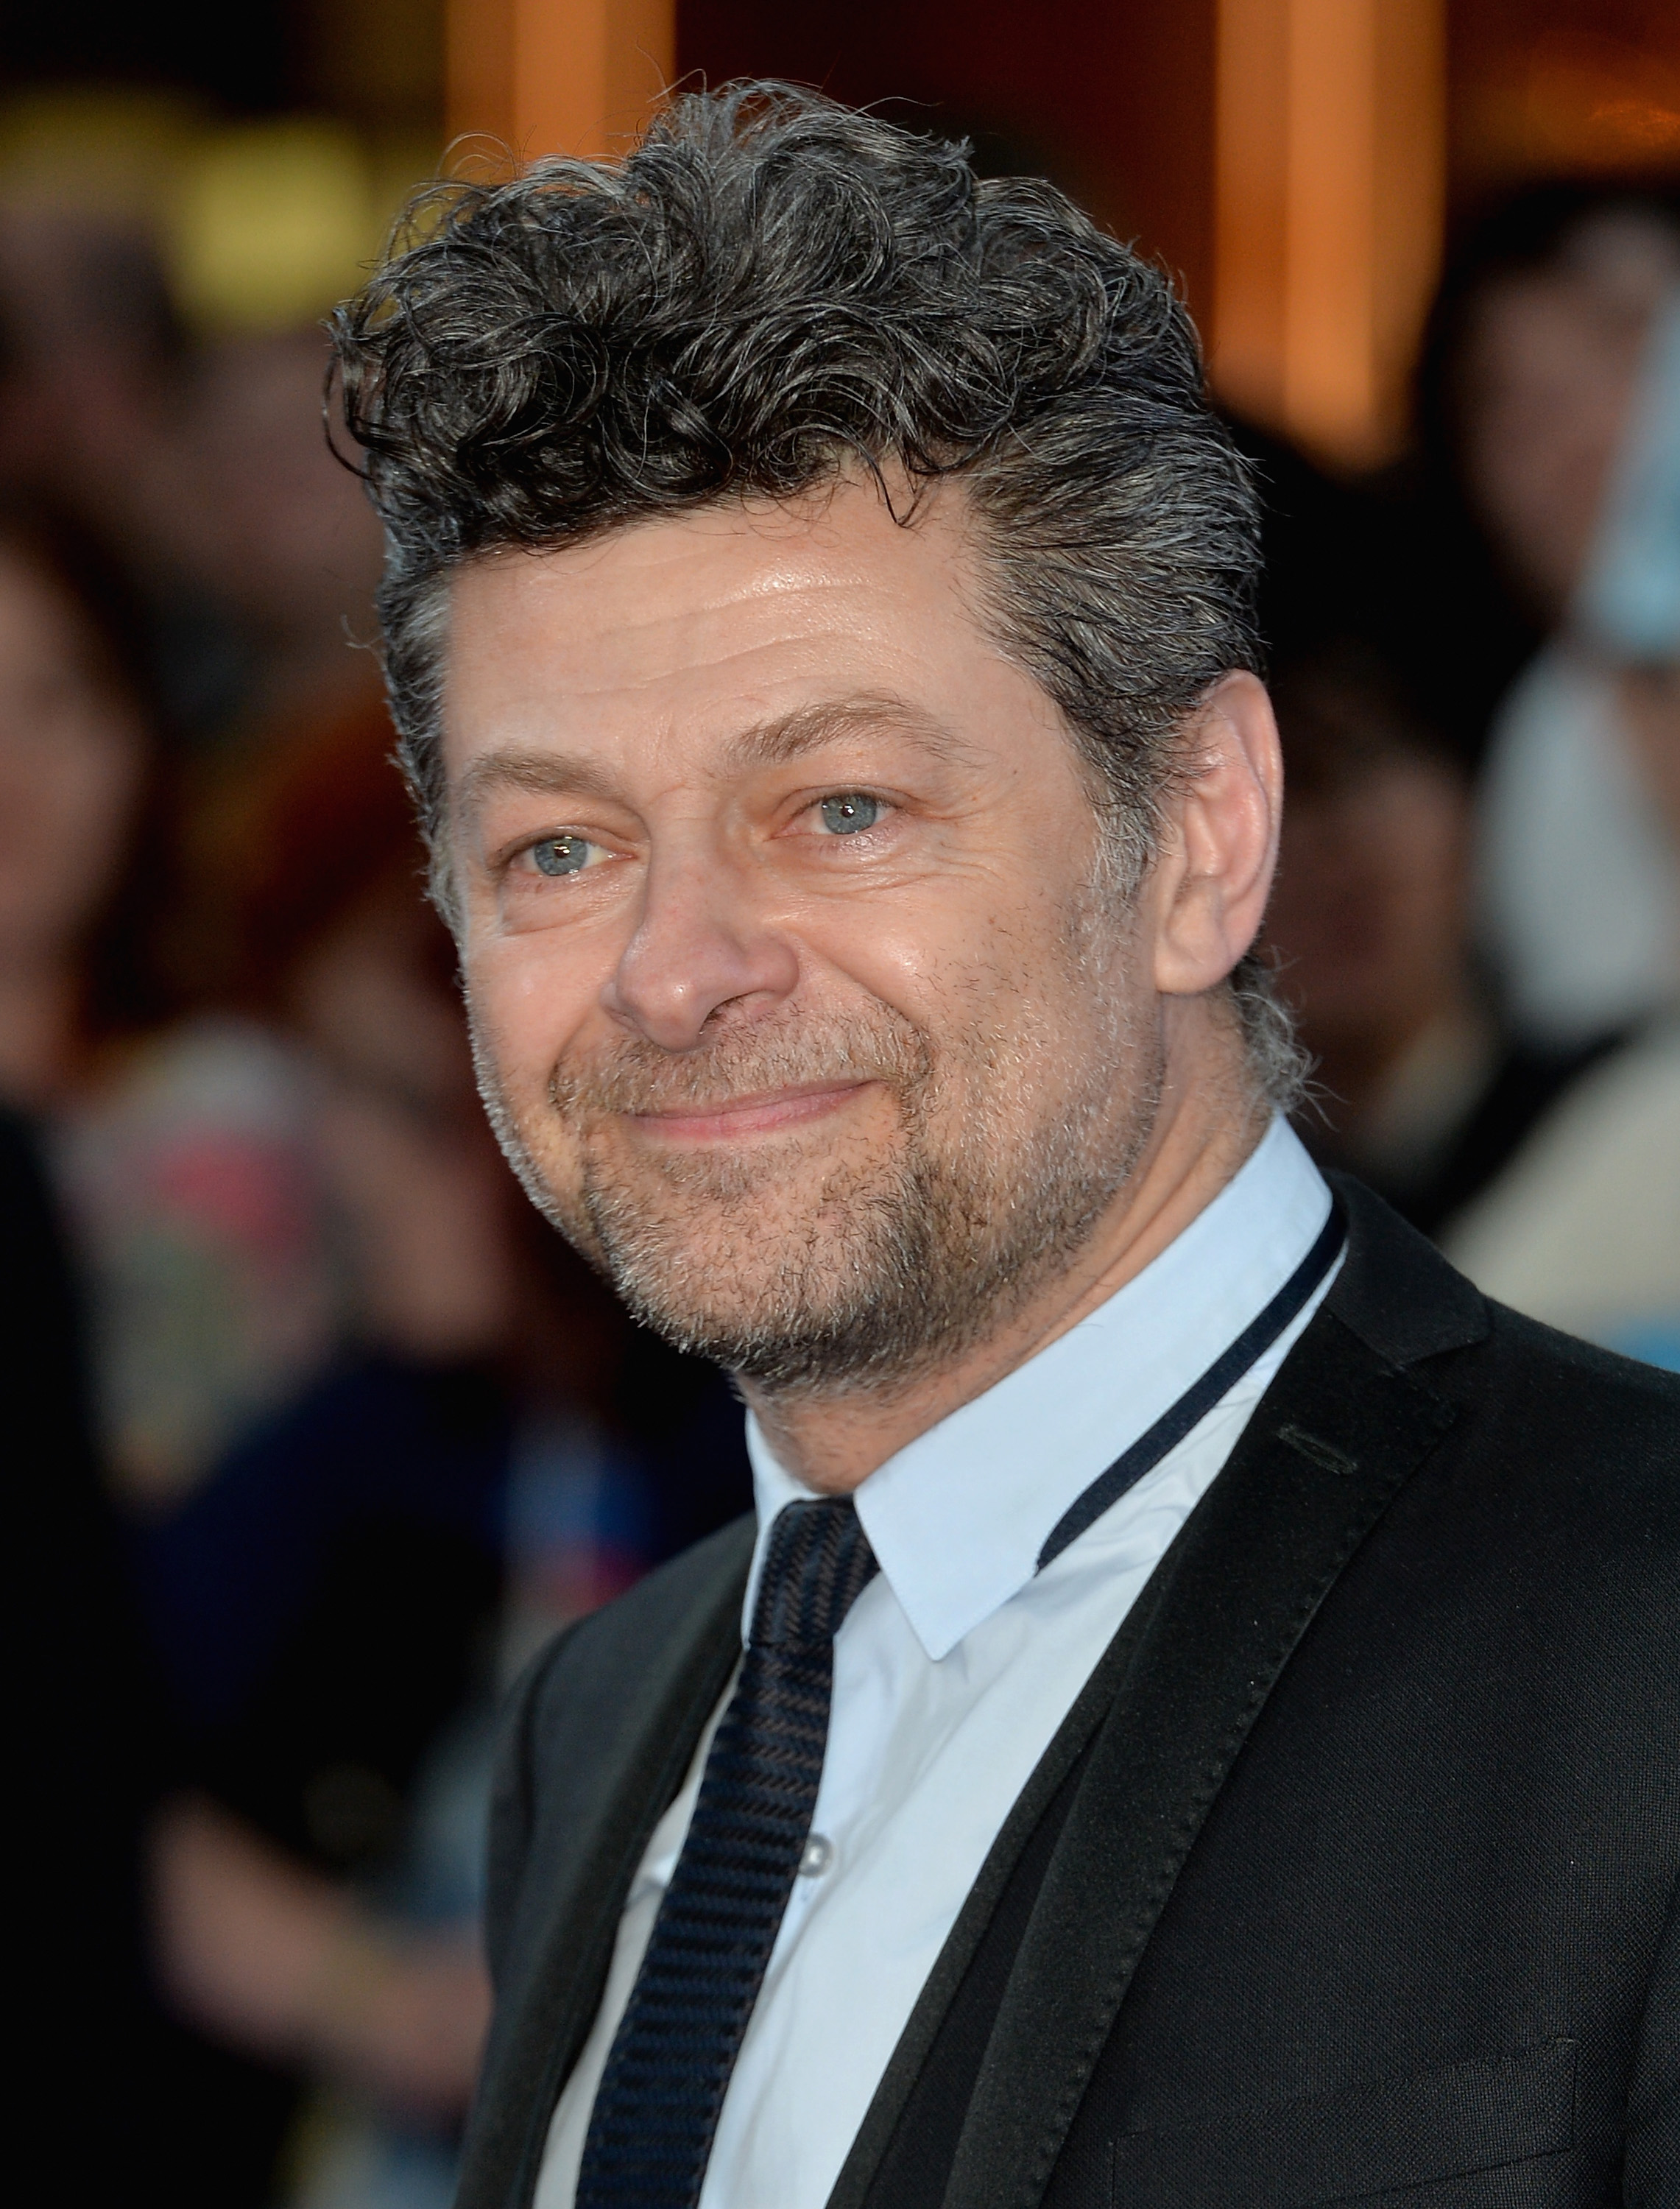 Andy Serkis attends "The Avengers: Age Of Ultron" European premiere at Westfield London on April 21, 2015 in London. (Anthony Harvey—Getty Images)